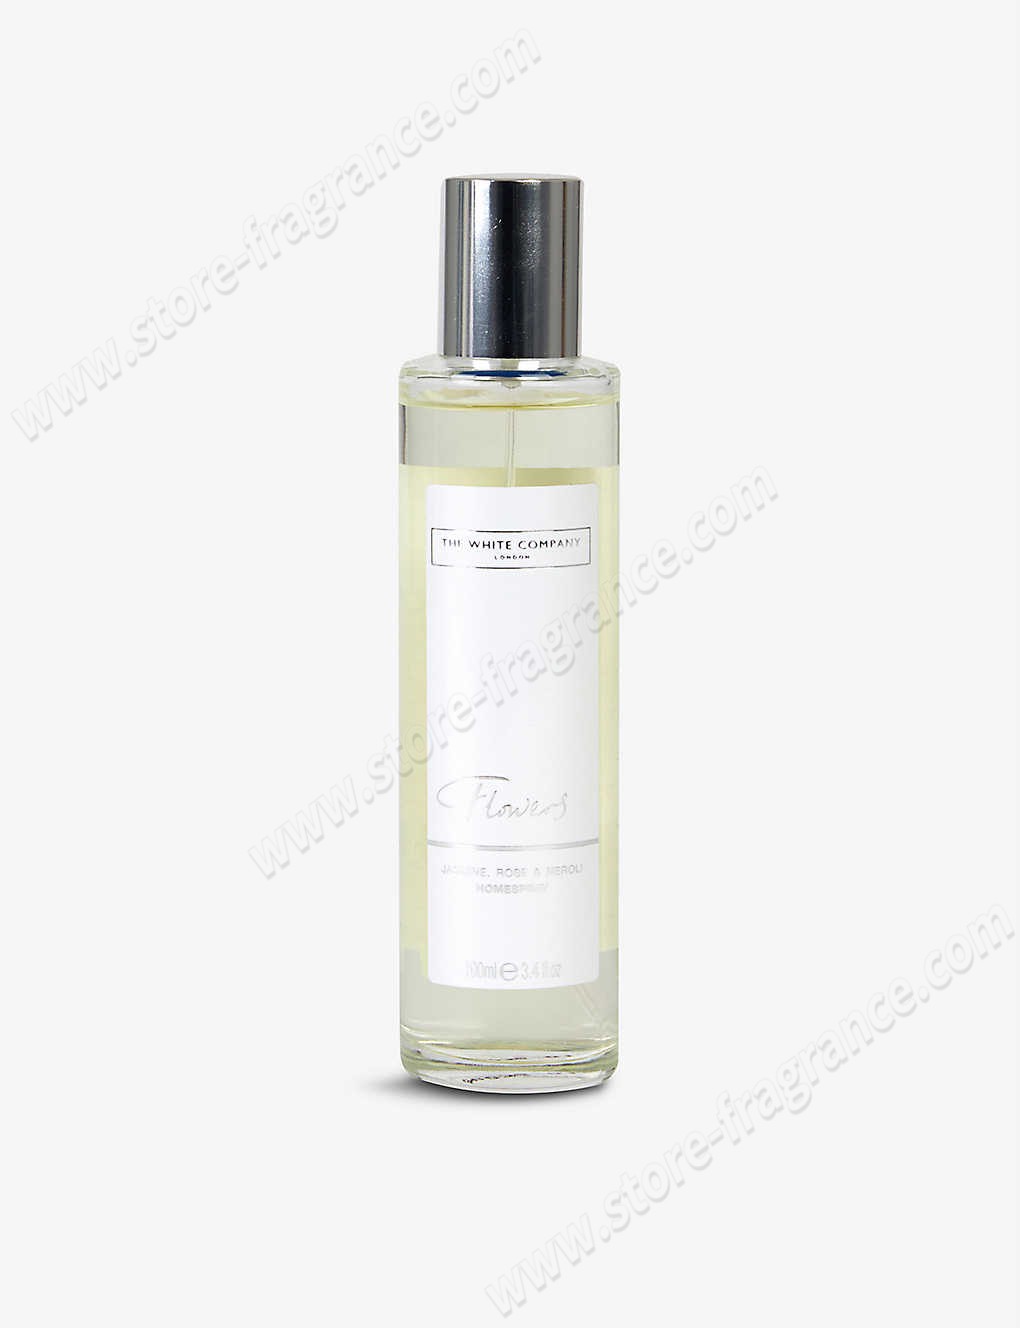 THE WHITE COMPANY/Flowers home spray 100ml Limit Offer - -0